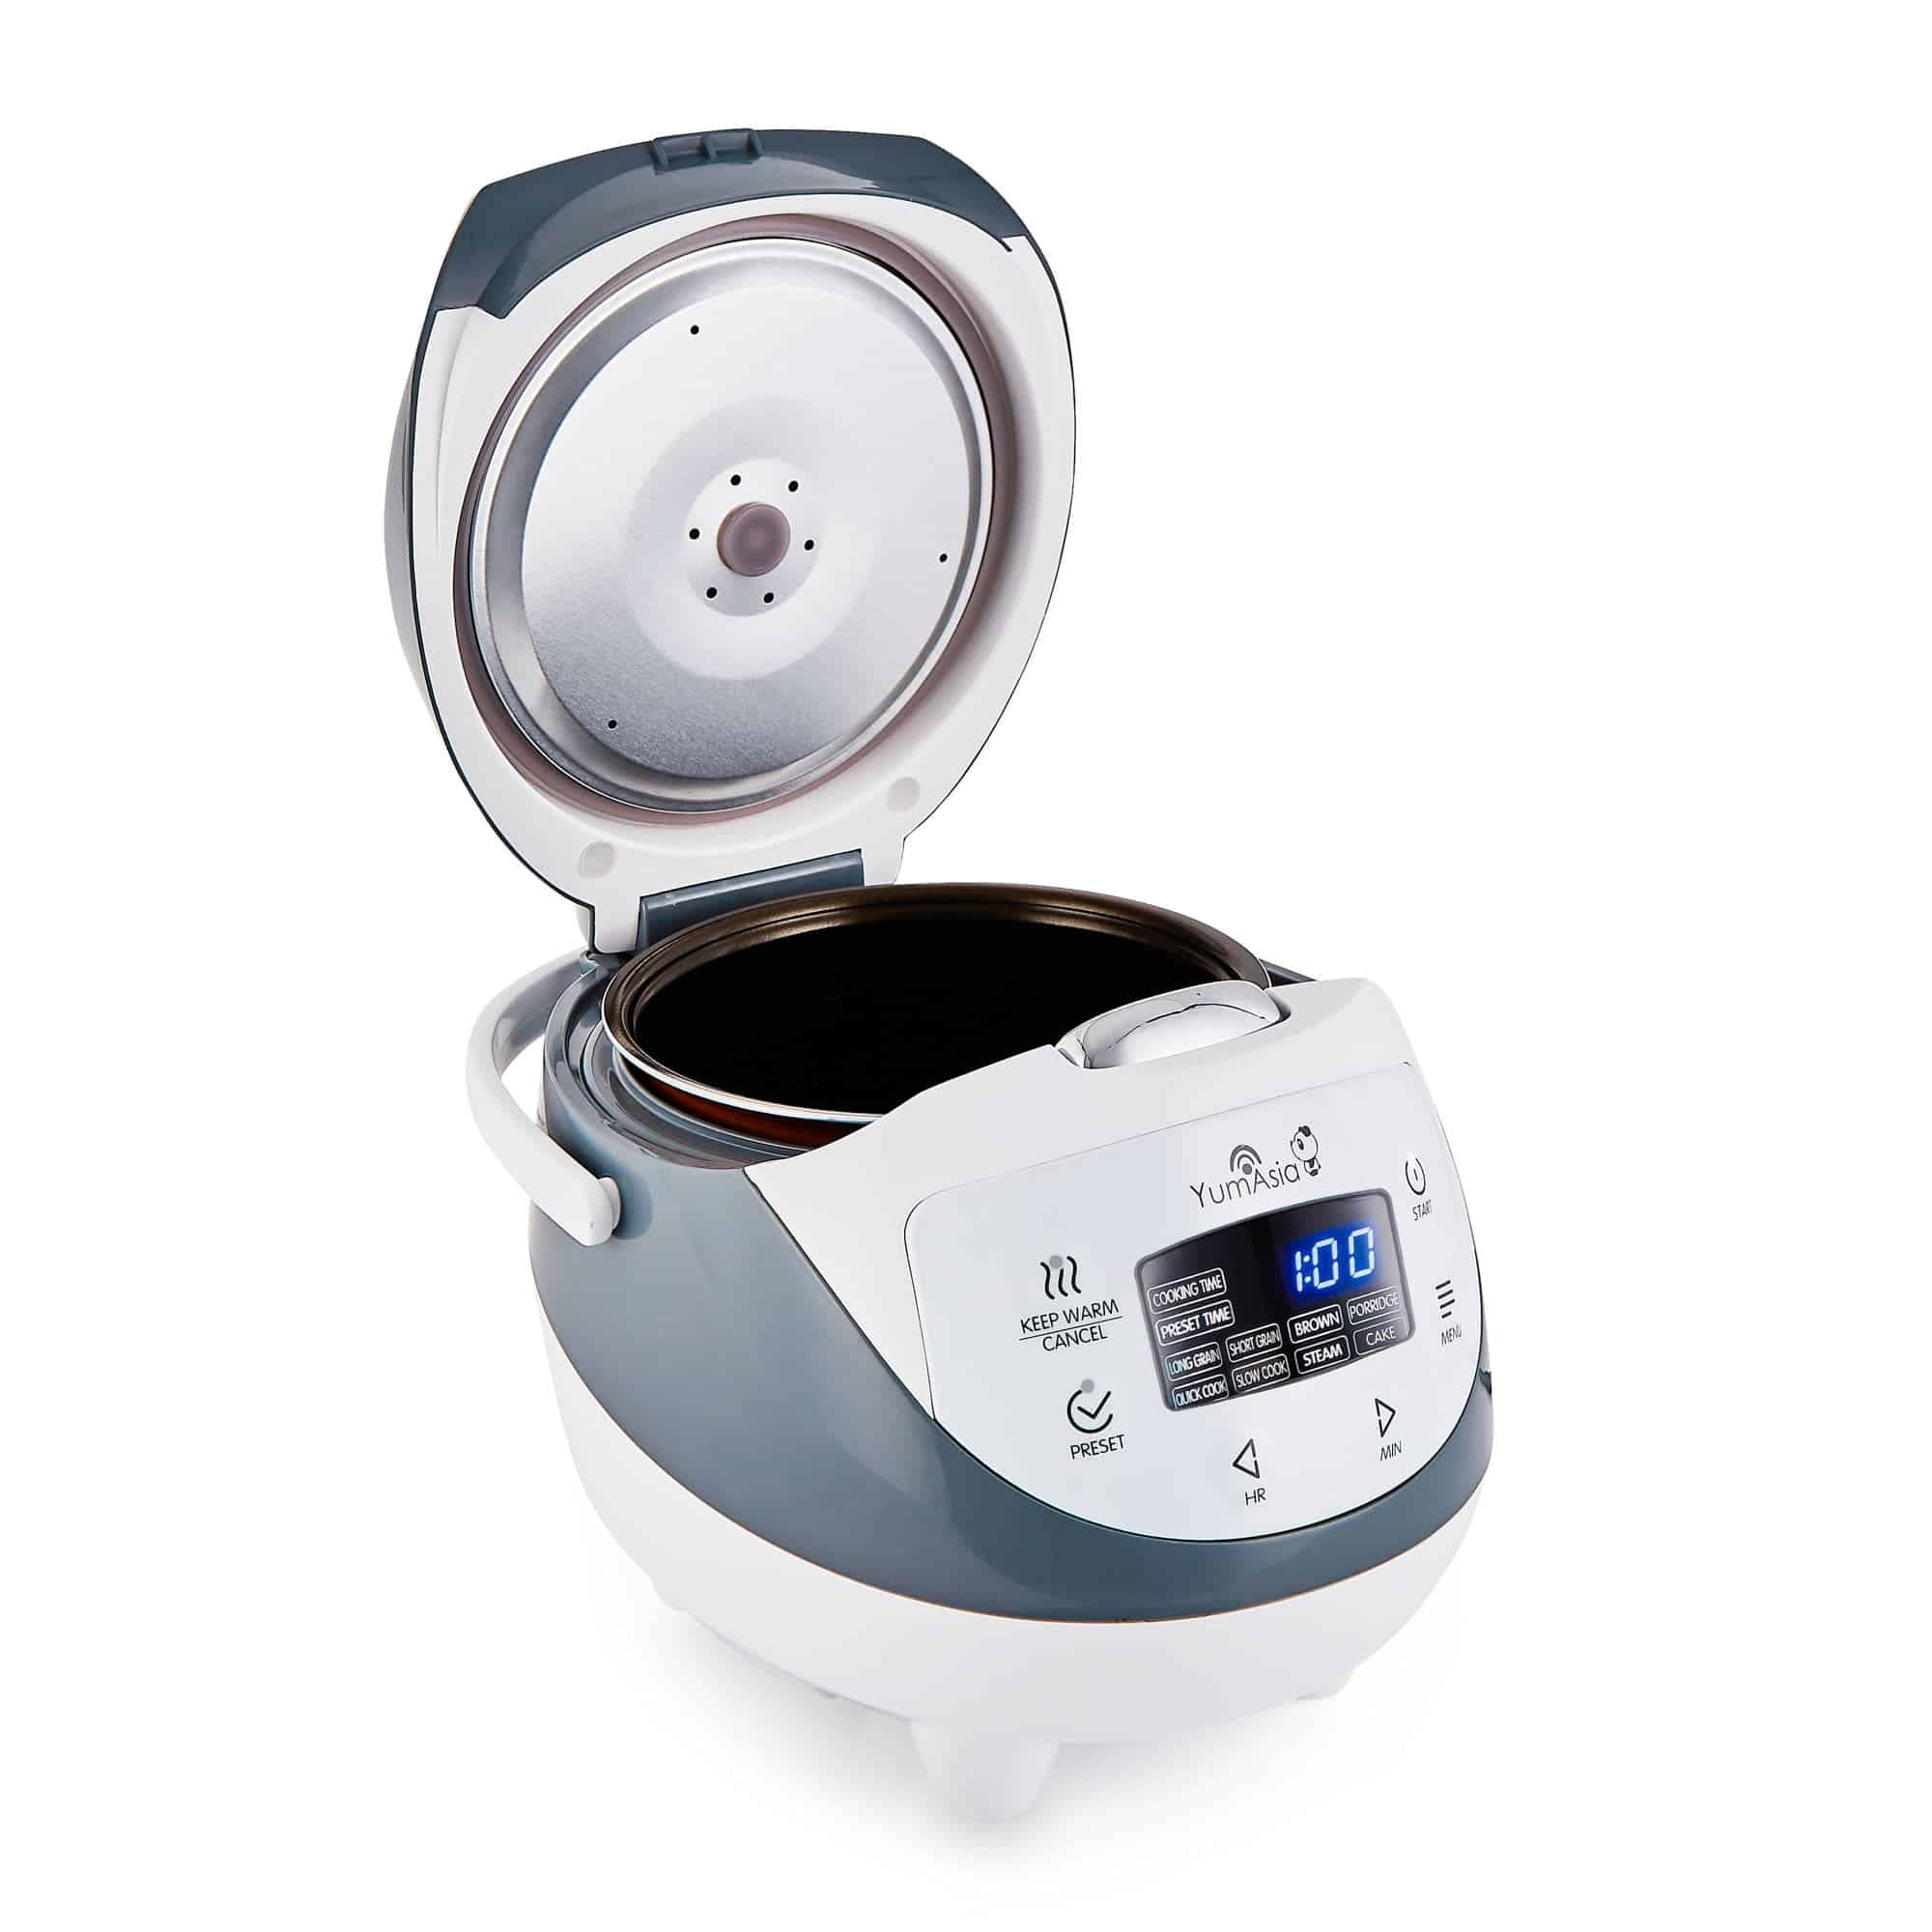 CodYinFI Panda Mini Rice Cooker With Ceramic Bowl and Advanced Fuzzy Logic  (3.5 cup, 0.63 litre) 4 Rice Cooking Functions, 4 Multicooker functions